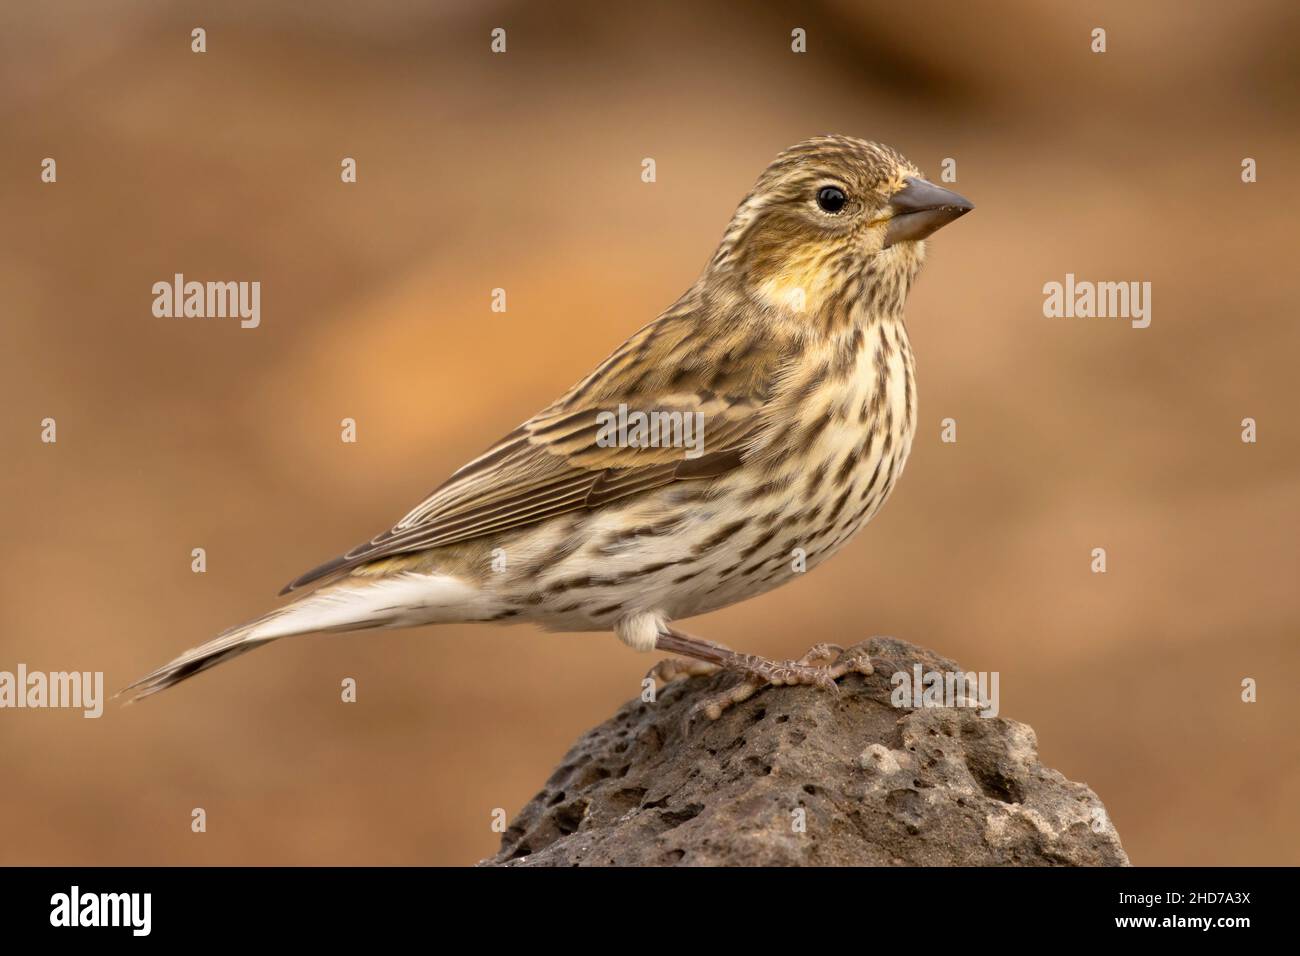 Cassin's Finch (Haemorhous cassinii), Cabin Lake Viewing Blind, Deschutes National Forest, Oregon. Stockfoto